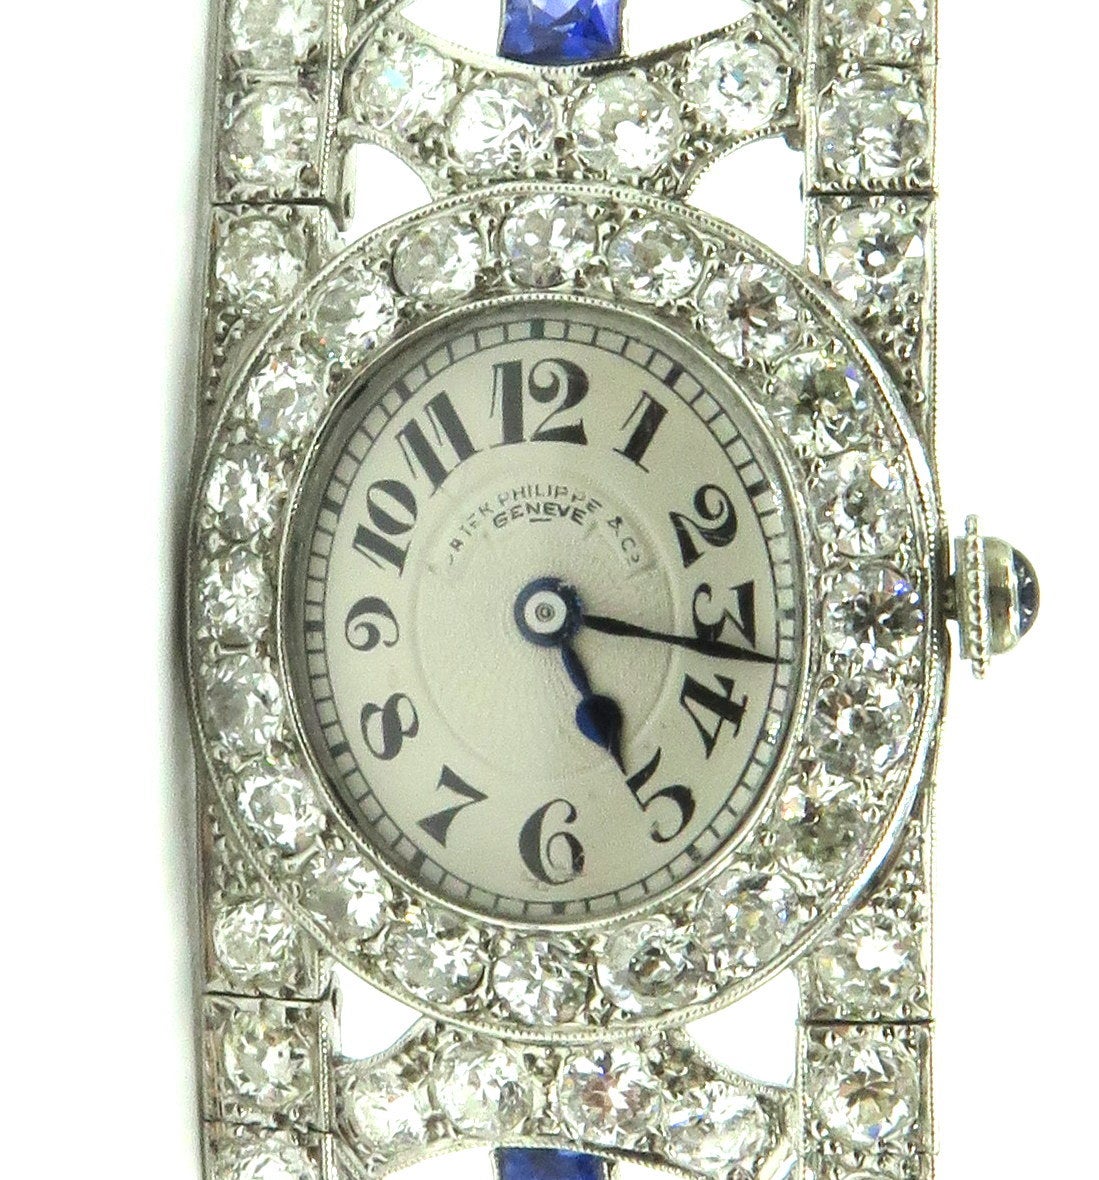 This is the most beautiful art deco bracelet ever! With arguably the best watch maker in the world, Patek Phillippe. You just can't get better than this!!! 
The mechanical movement, working perfectly, is centering on an oval off-white guilloche